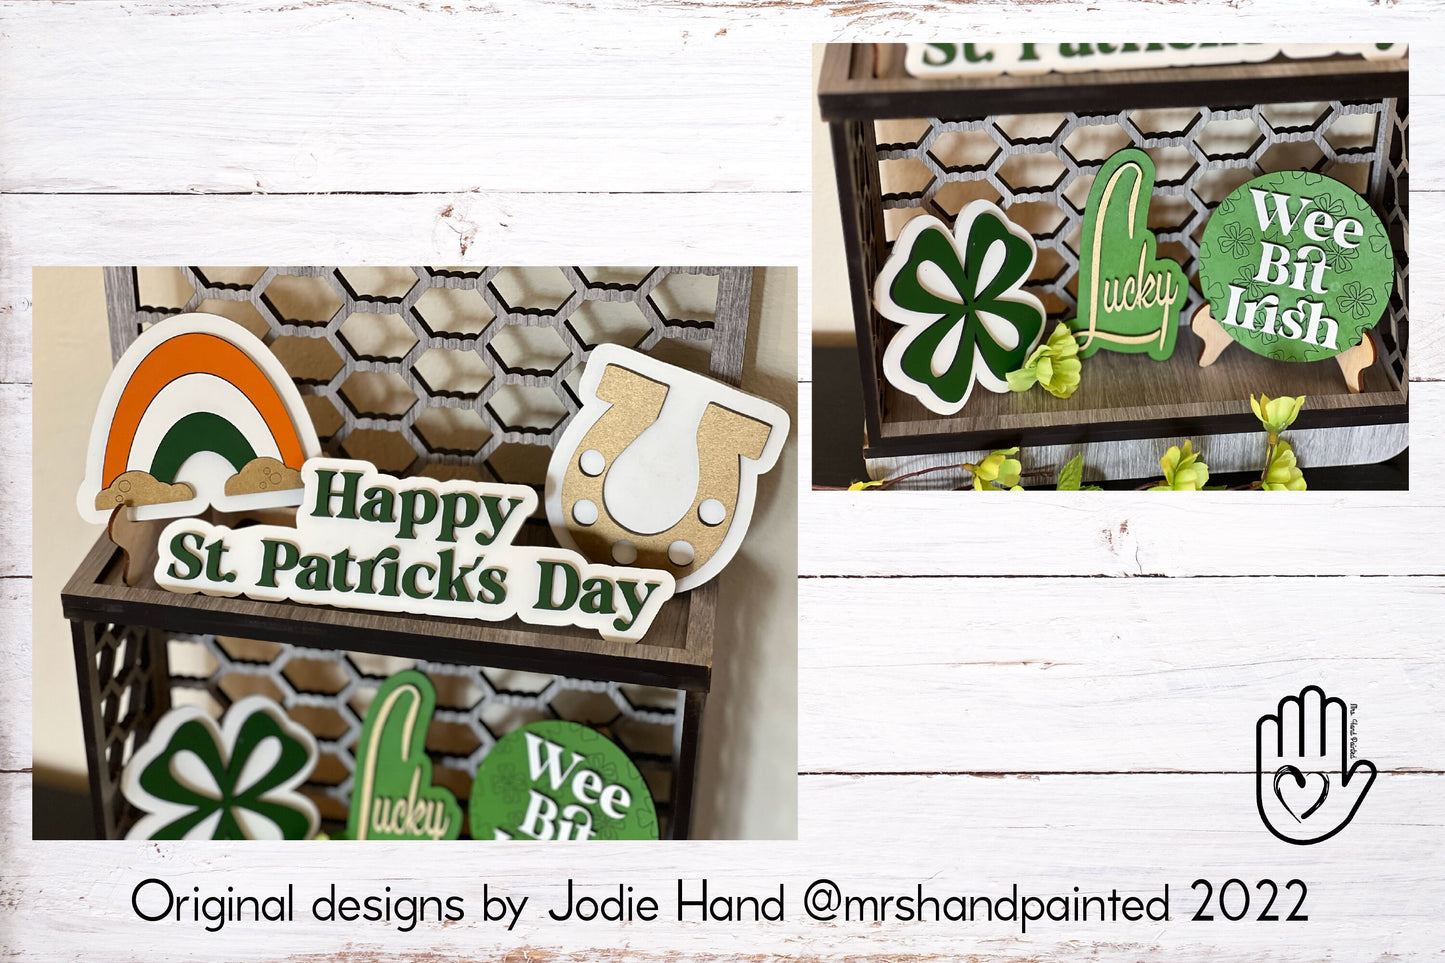 Retro St. Patrick's Day Tiered Tray Decor Pieces - Laser Cut Wood Painted